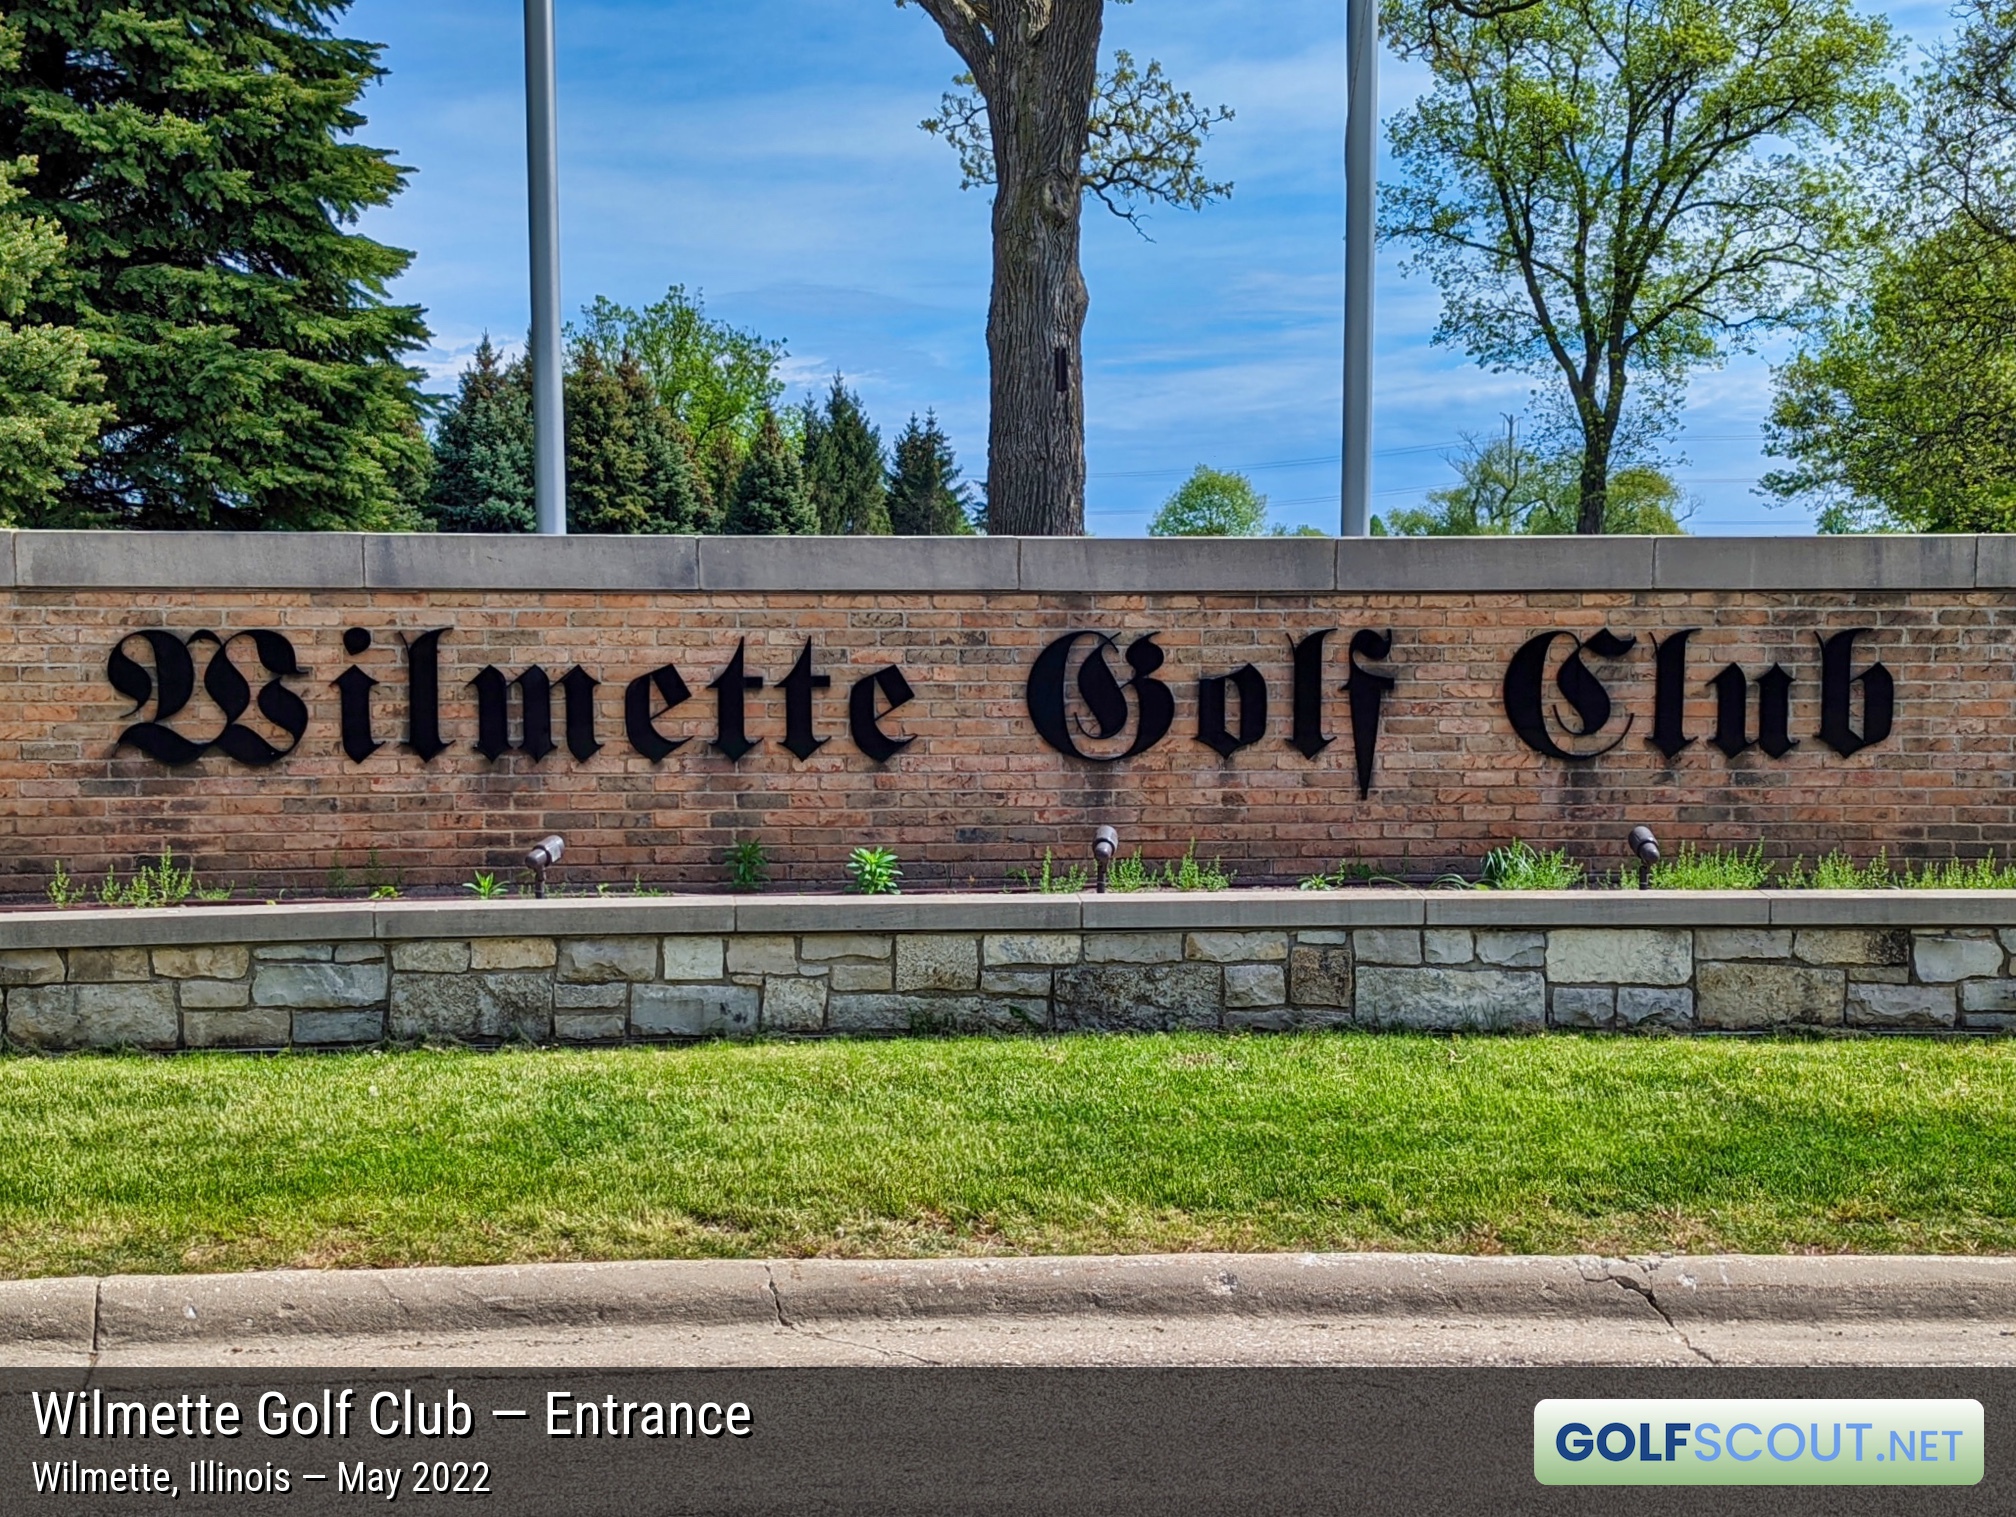 Sign at the entrance to Wilmette Golf Club